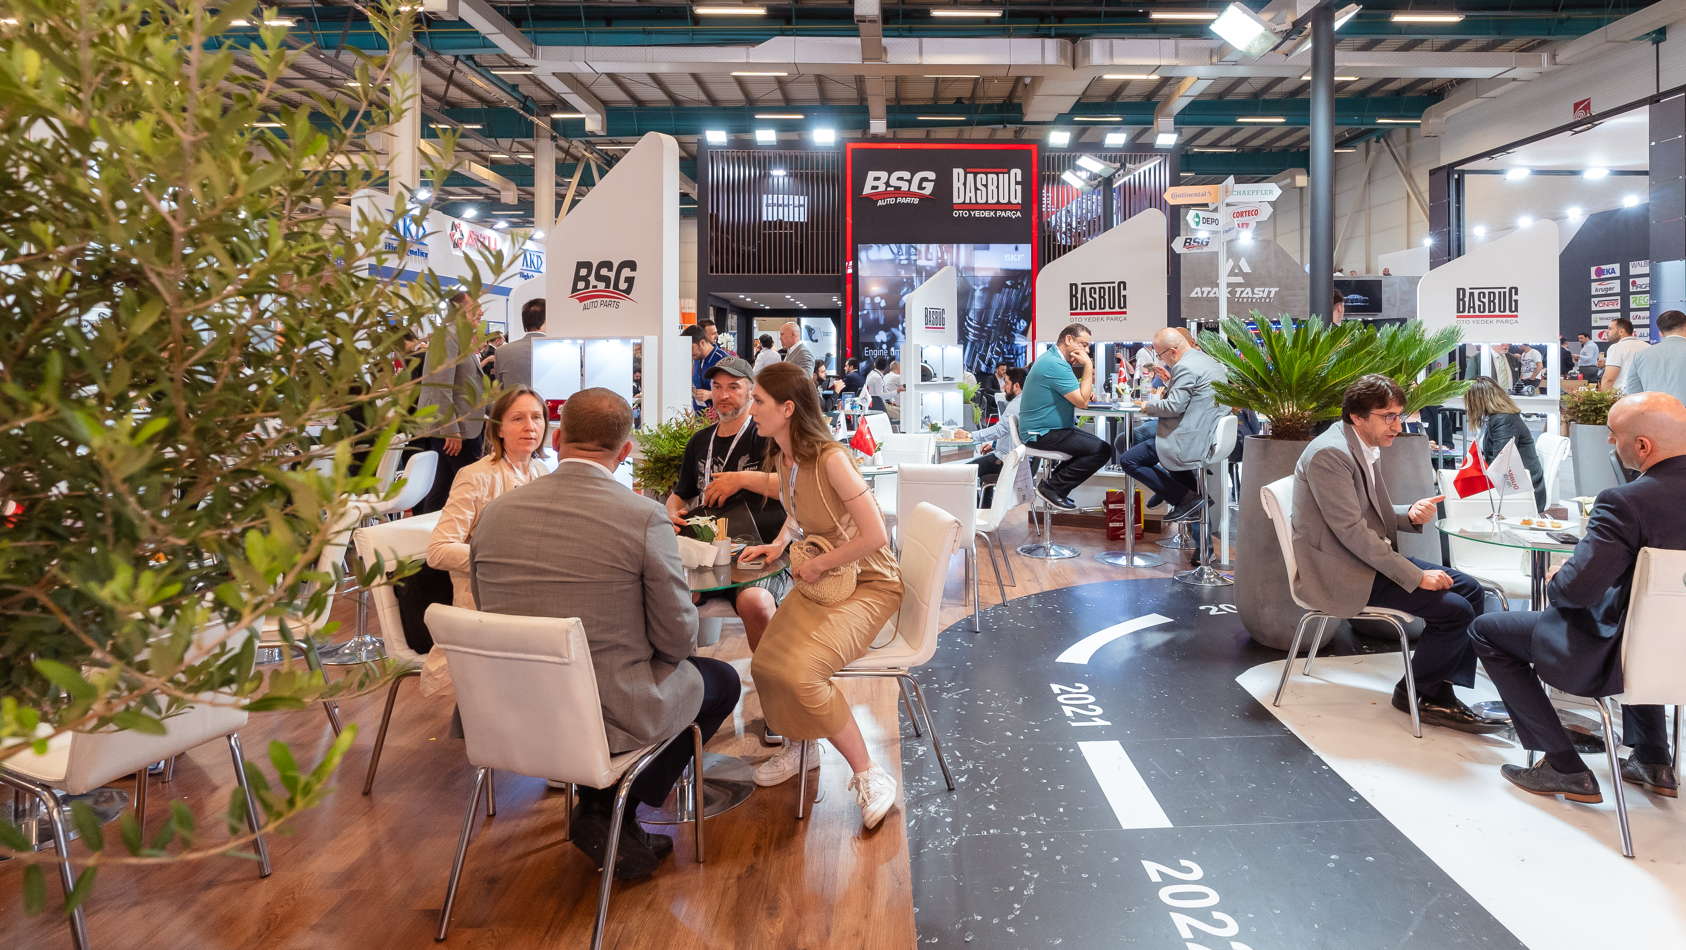 <p>Automechanika Istanbul, the only event in Turkey of Automechanika, the world's leading fair brand for the automotive aftermarket industry, opened its doors for the 15. time on 2-5 June 2022; BSG Auto Parts took its place in the 8. hall, stand 020, where it has hosted its guests for years.</p>

<p>The fair, which was very productive with the number of participants exceeding expectations, brought together all automotive production and repair professionals from three continents. The fair, which attracted great interest from countries such as Turkey, Iran, Iraq, Palestine, Libya, Bulgaria, Tunisia, Jordan, Egypt and Algeria, was held at TÜYAP Fair and Congress Center.</p>

<p>AutomechanikaI Istanbul, which brings together the automotive aftermarket sector, which has a size of over 30 billion USD in Turkey's exports, with professionals from all over the world once again in Istanbul, was visited by 34,552 and 13,802 international professionals from Turkey and a total of 48,354 people from 141 countries.</p>